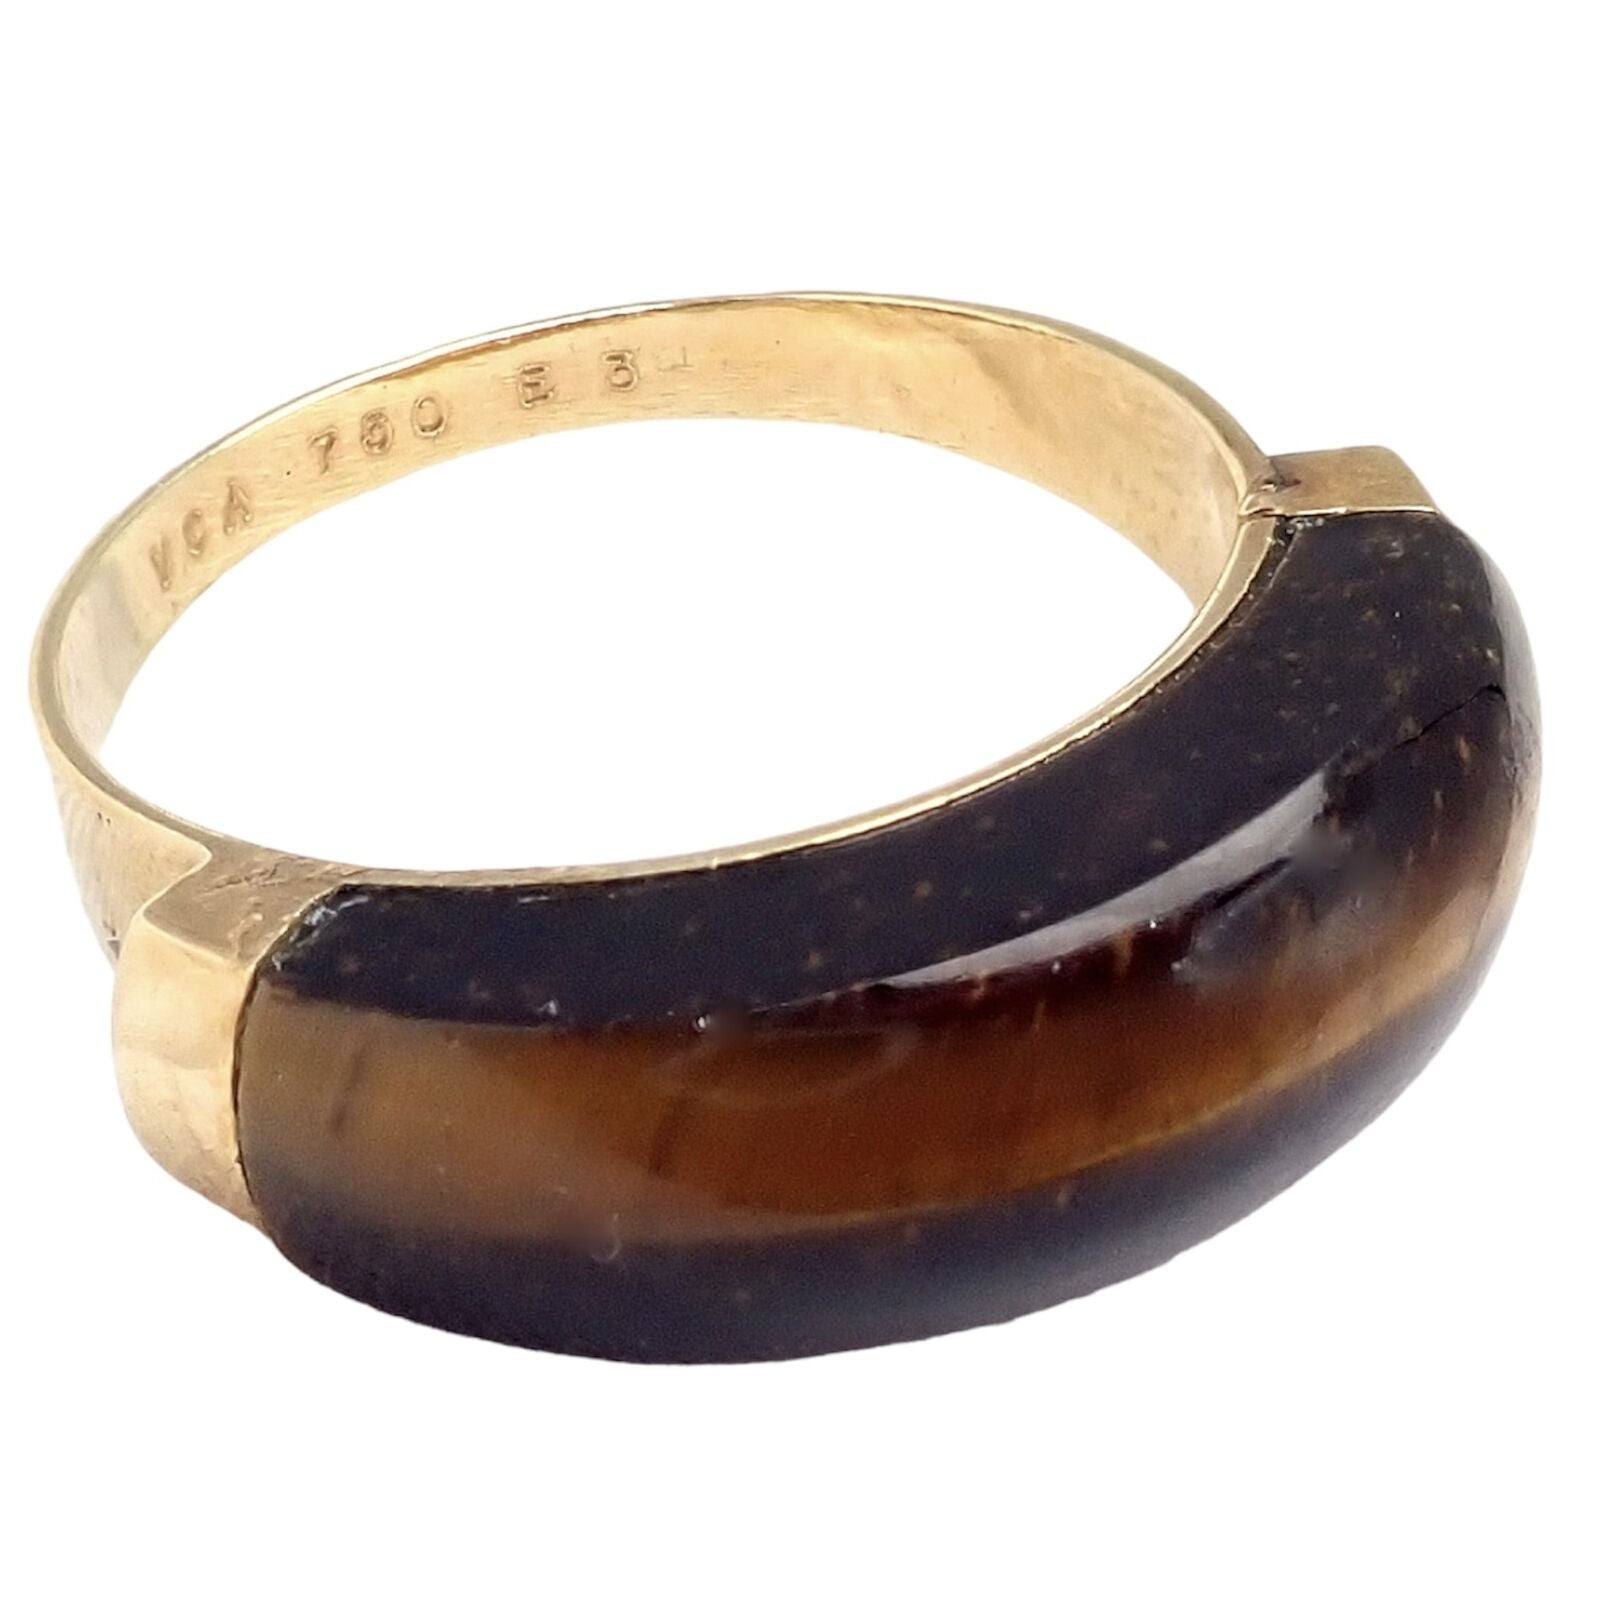 Van Cleef & Arpels Jewelry & Watches:Fine Jewelry:Rings Rare! Authentic Vintage Van Cleef & Arpels 18k Yellow Gold Tiger Eye Band Ring